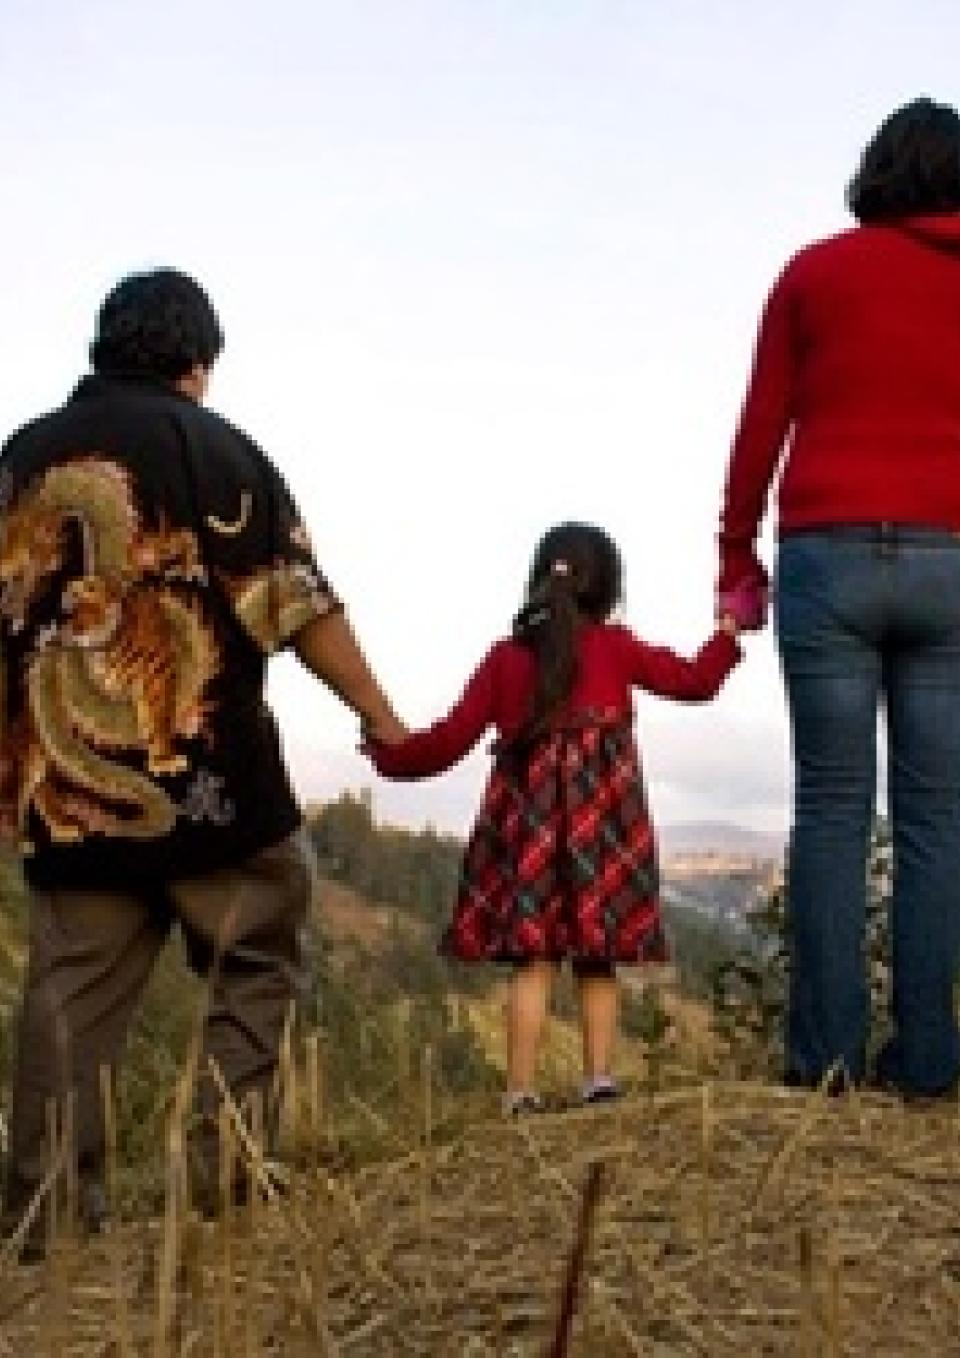 A still from the New Day film Sin Pais. The backs of three family members holding hands, a small child in the middle. They walk on a sandy path with tall grass on either side.